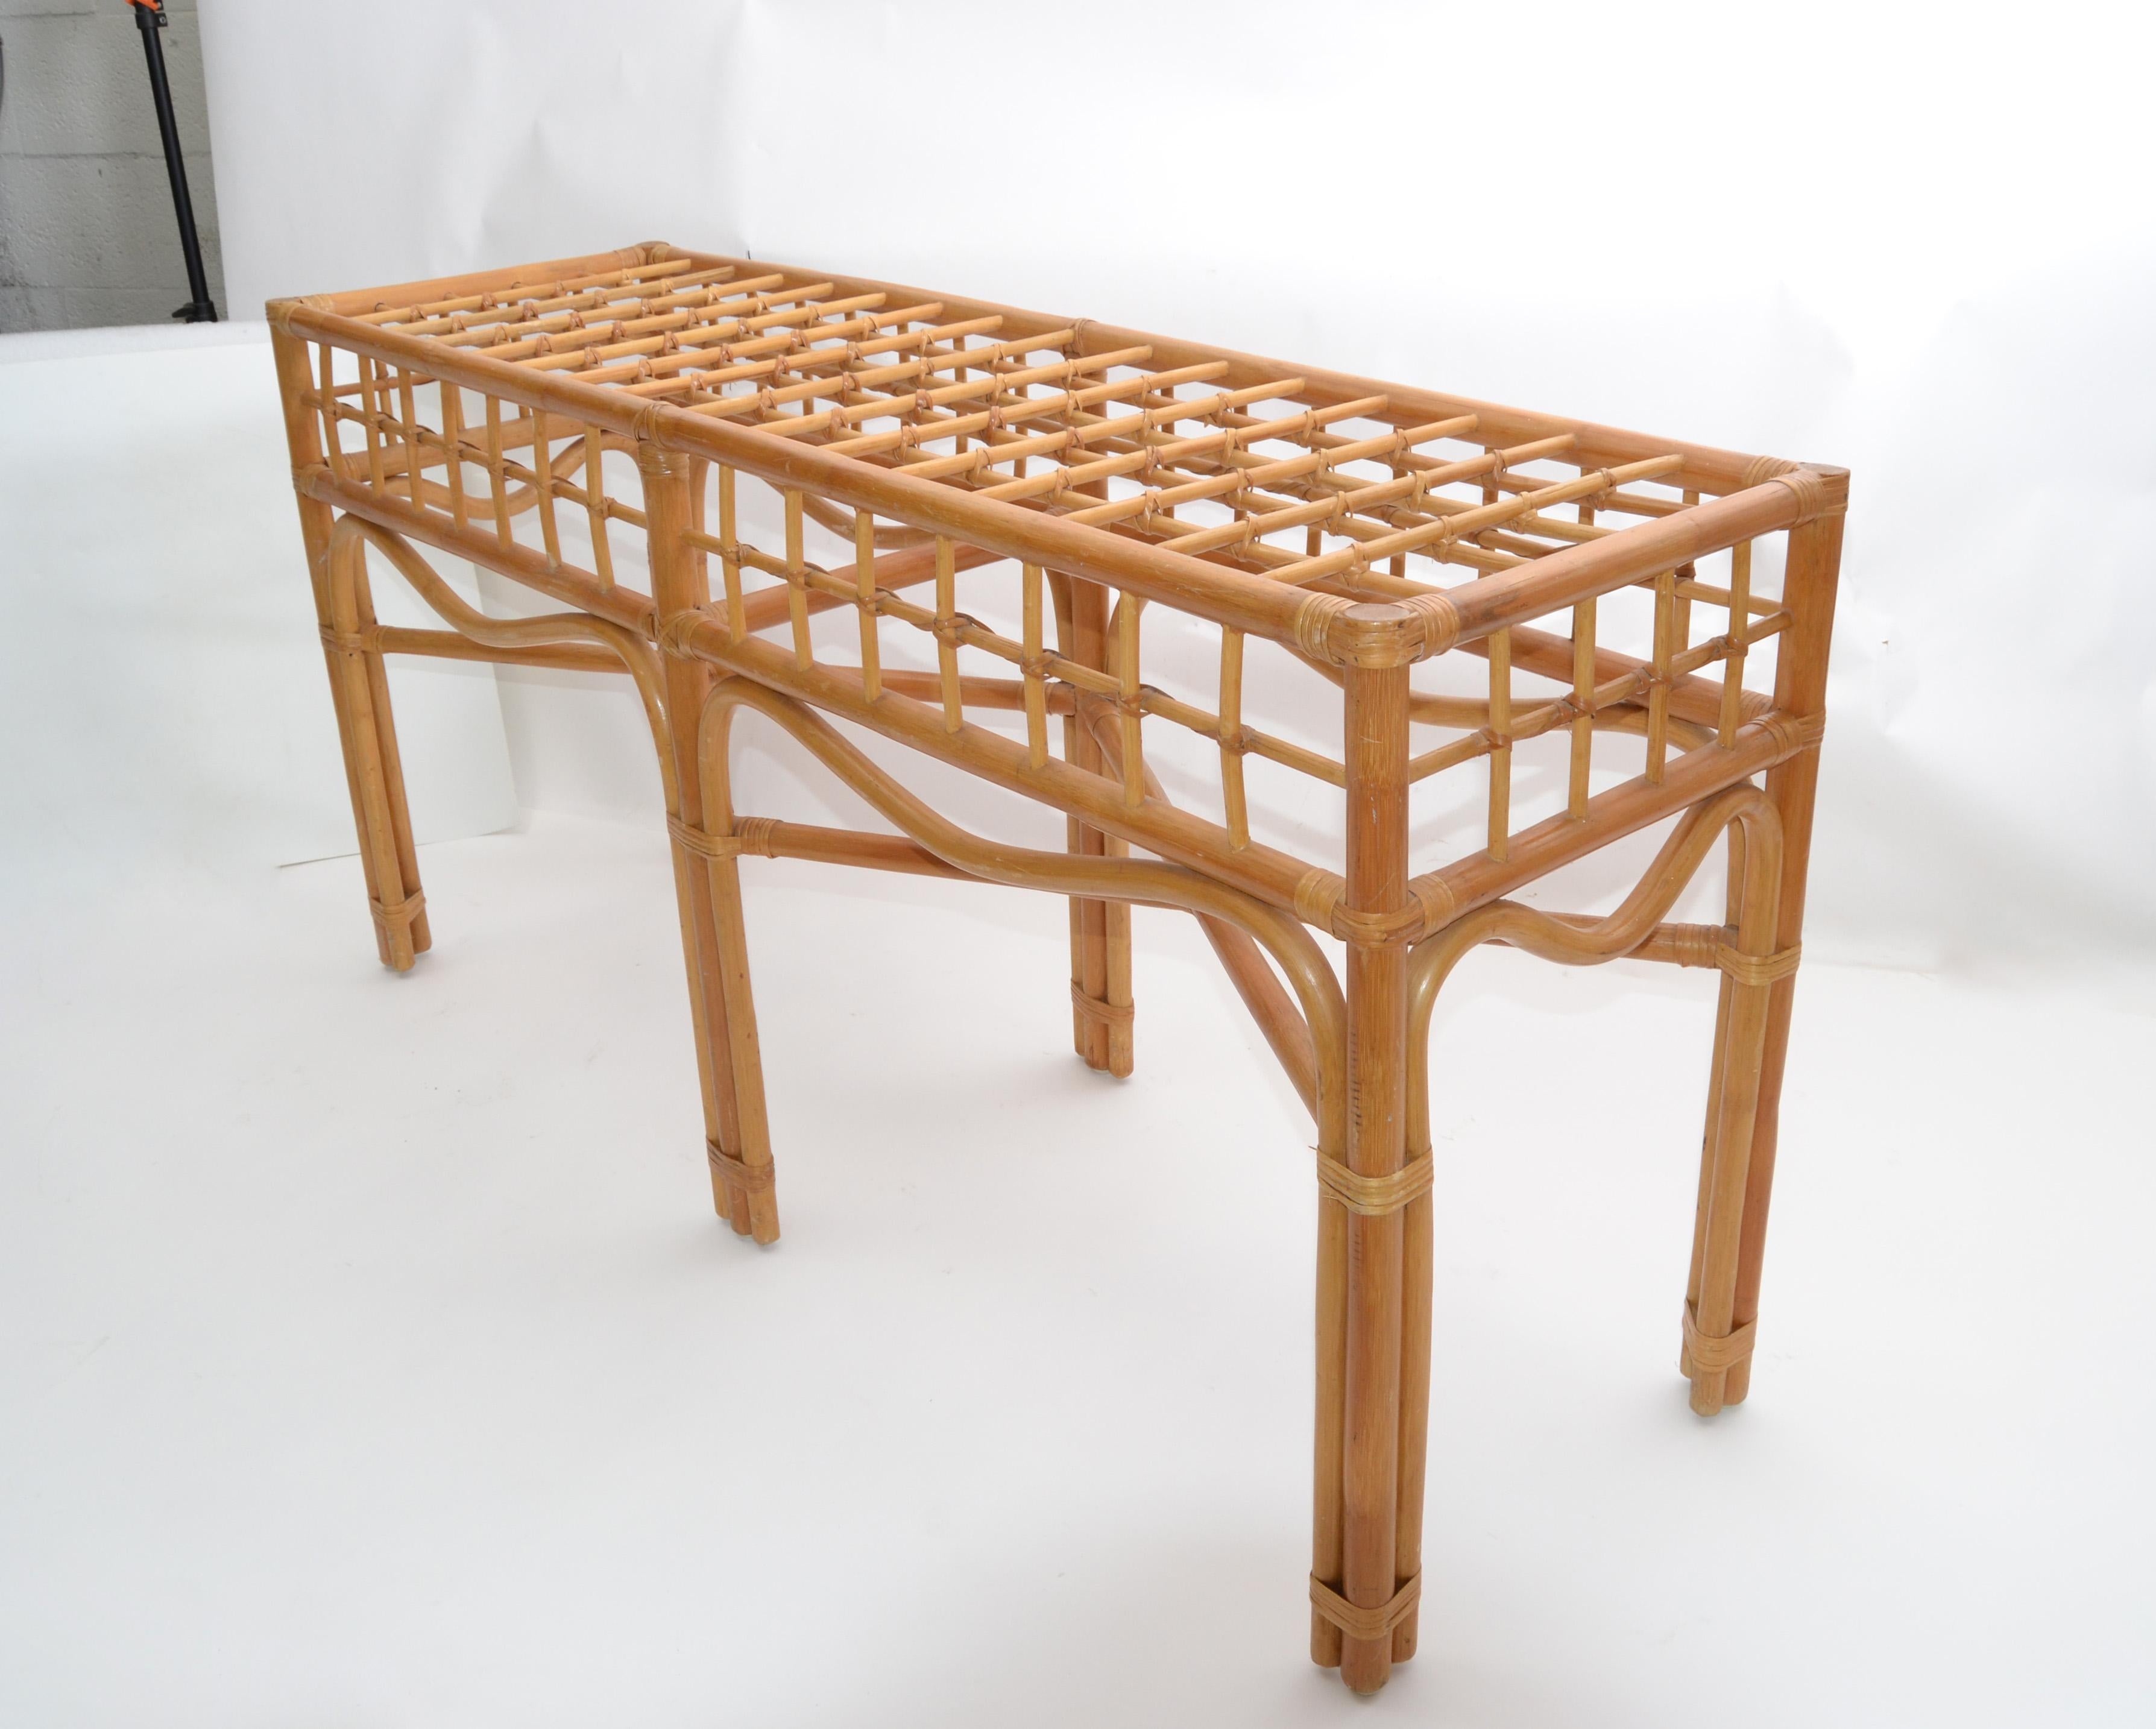 Hand-Crafted Bohemian Style Handcrafted Bent Bamboo and Rattan Console Table with Glass Top For Sale